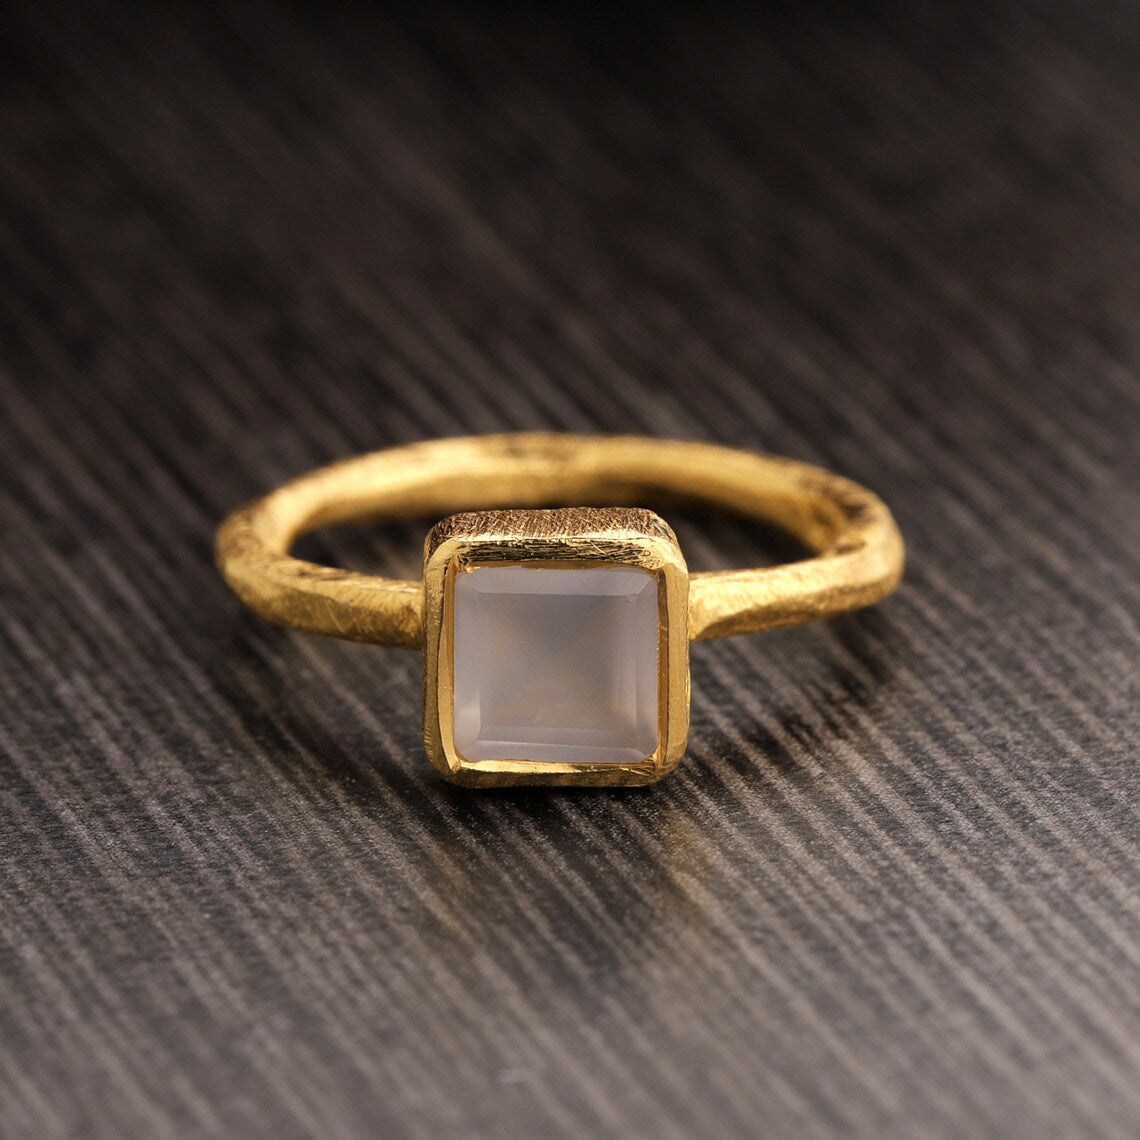 Chalcedony Ring-Gemstone Ring-Gold Ring-925 Sterling Silver-Scratched Finish Band Ring